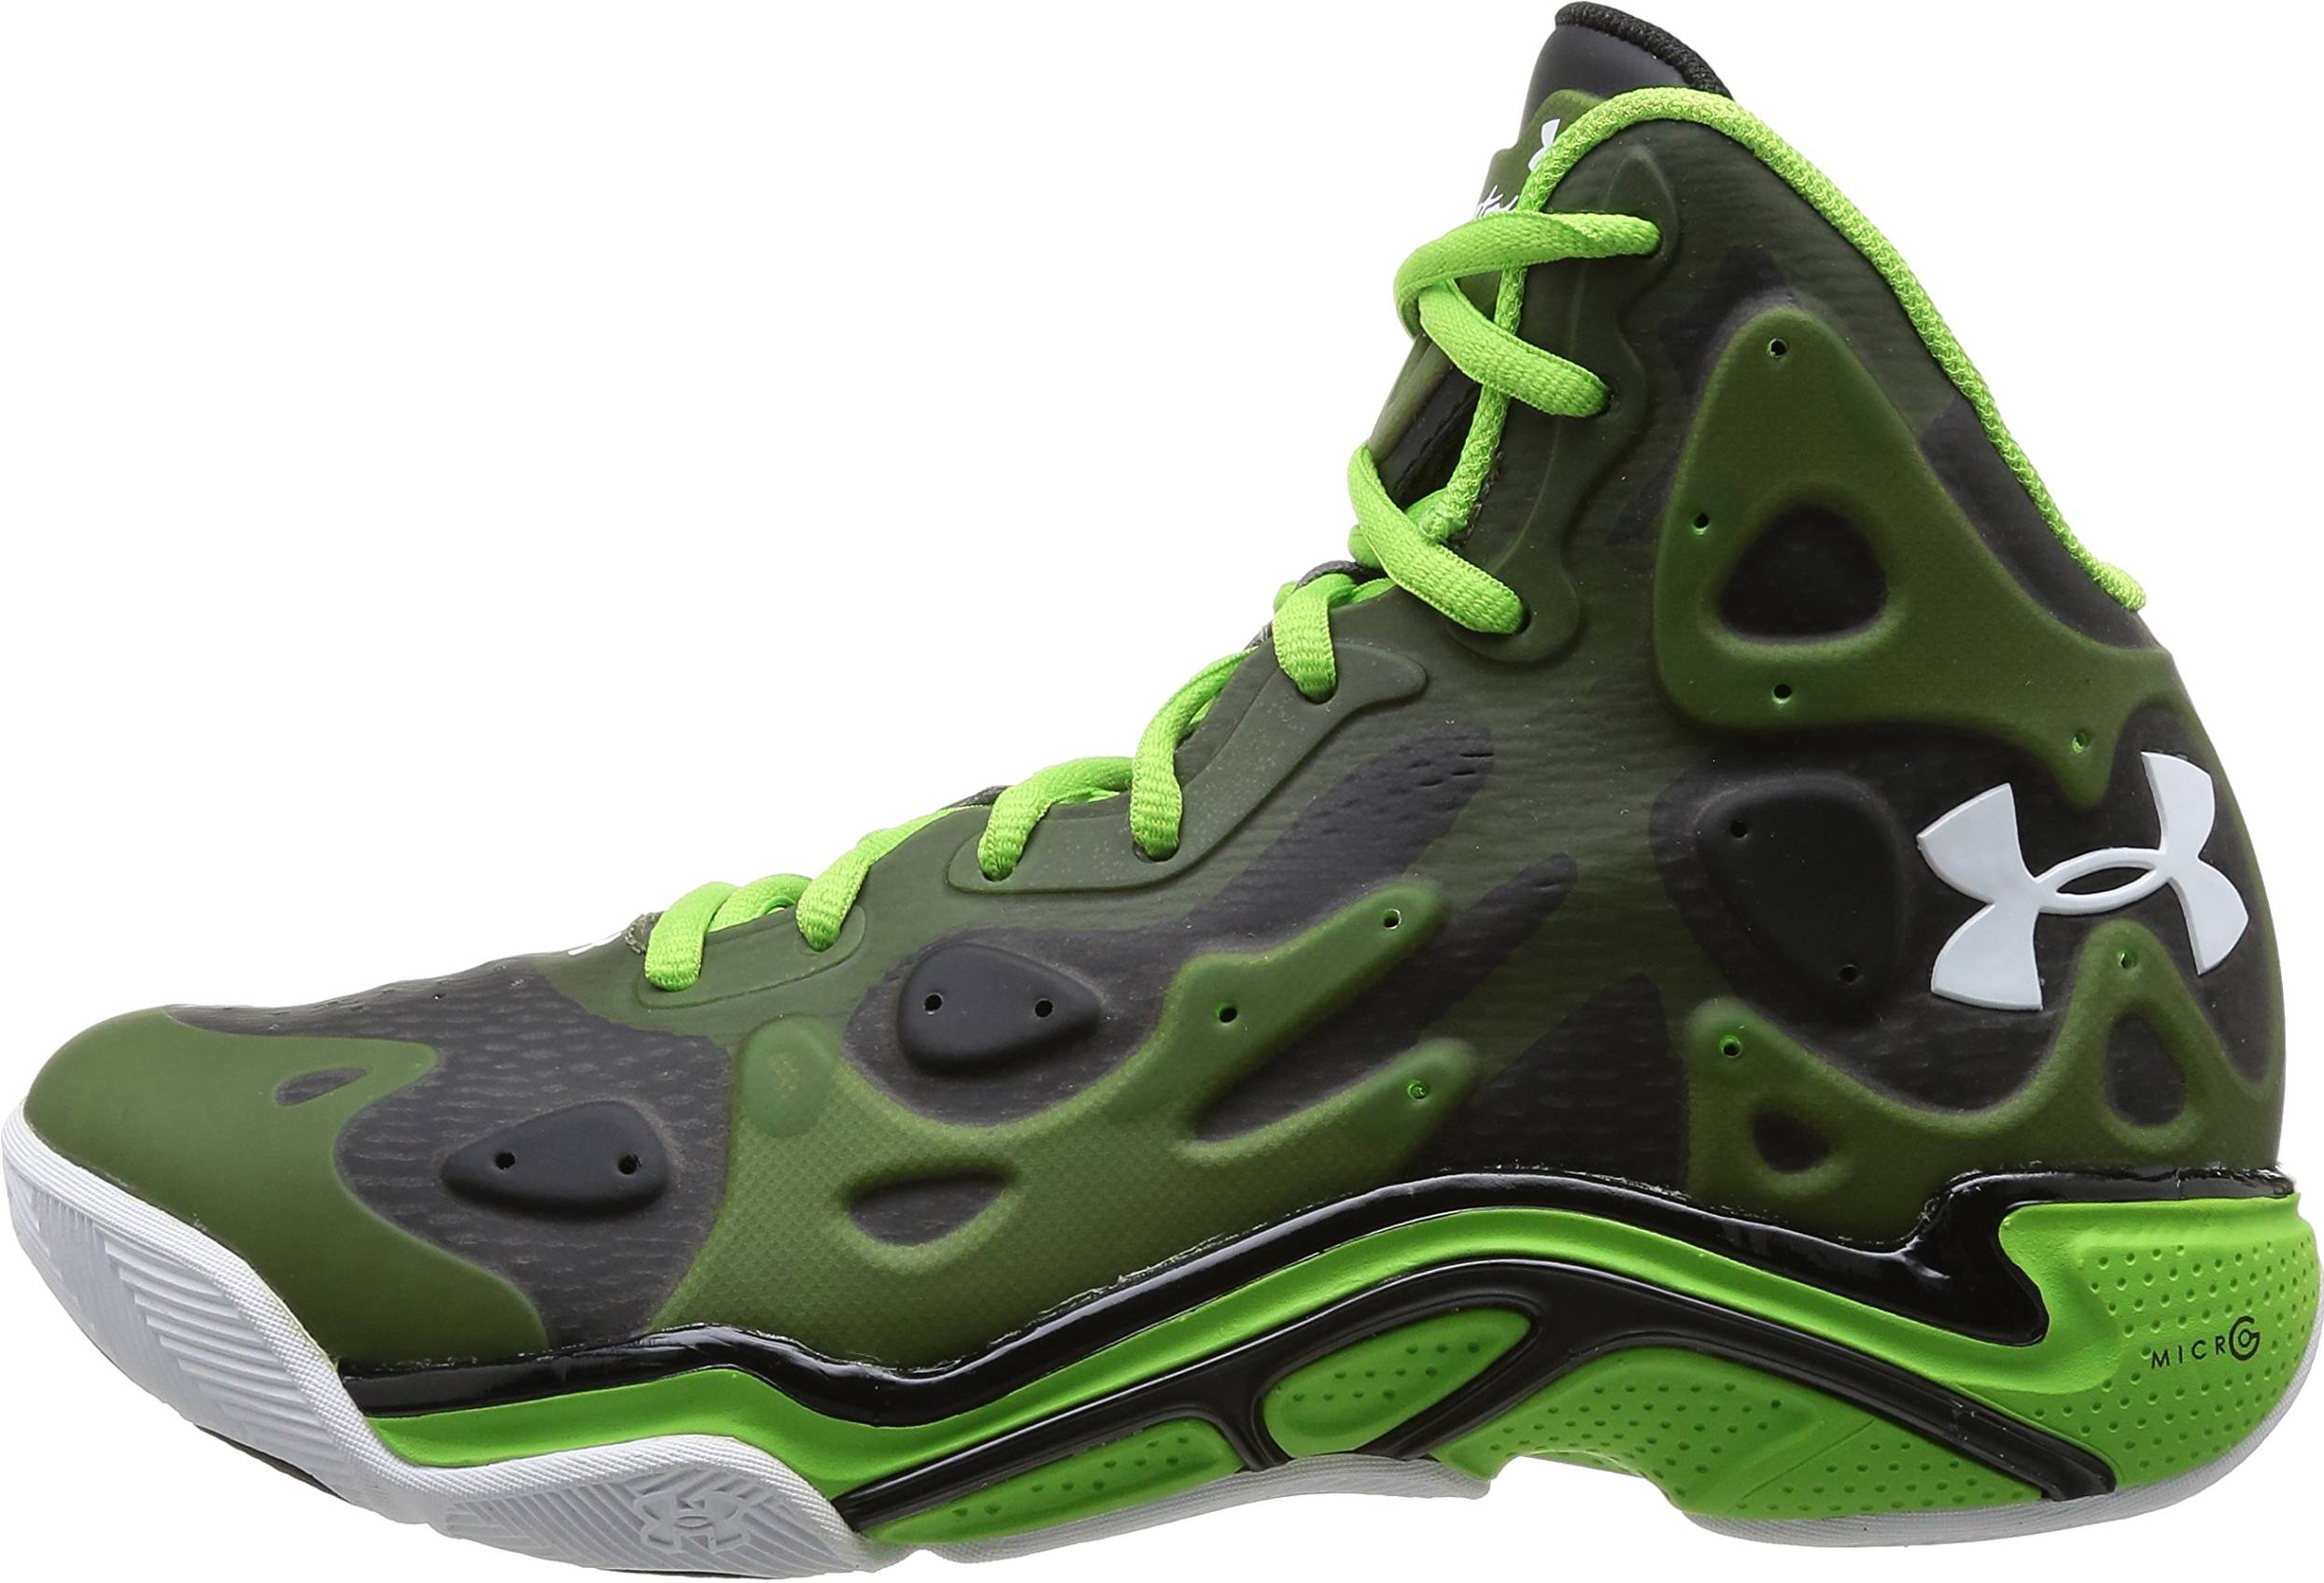 green under armour basketball shoes